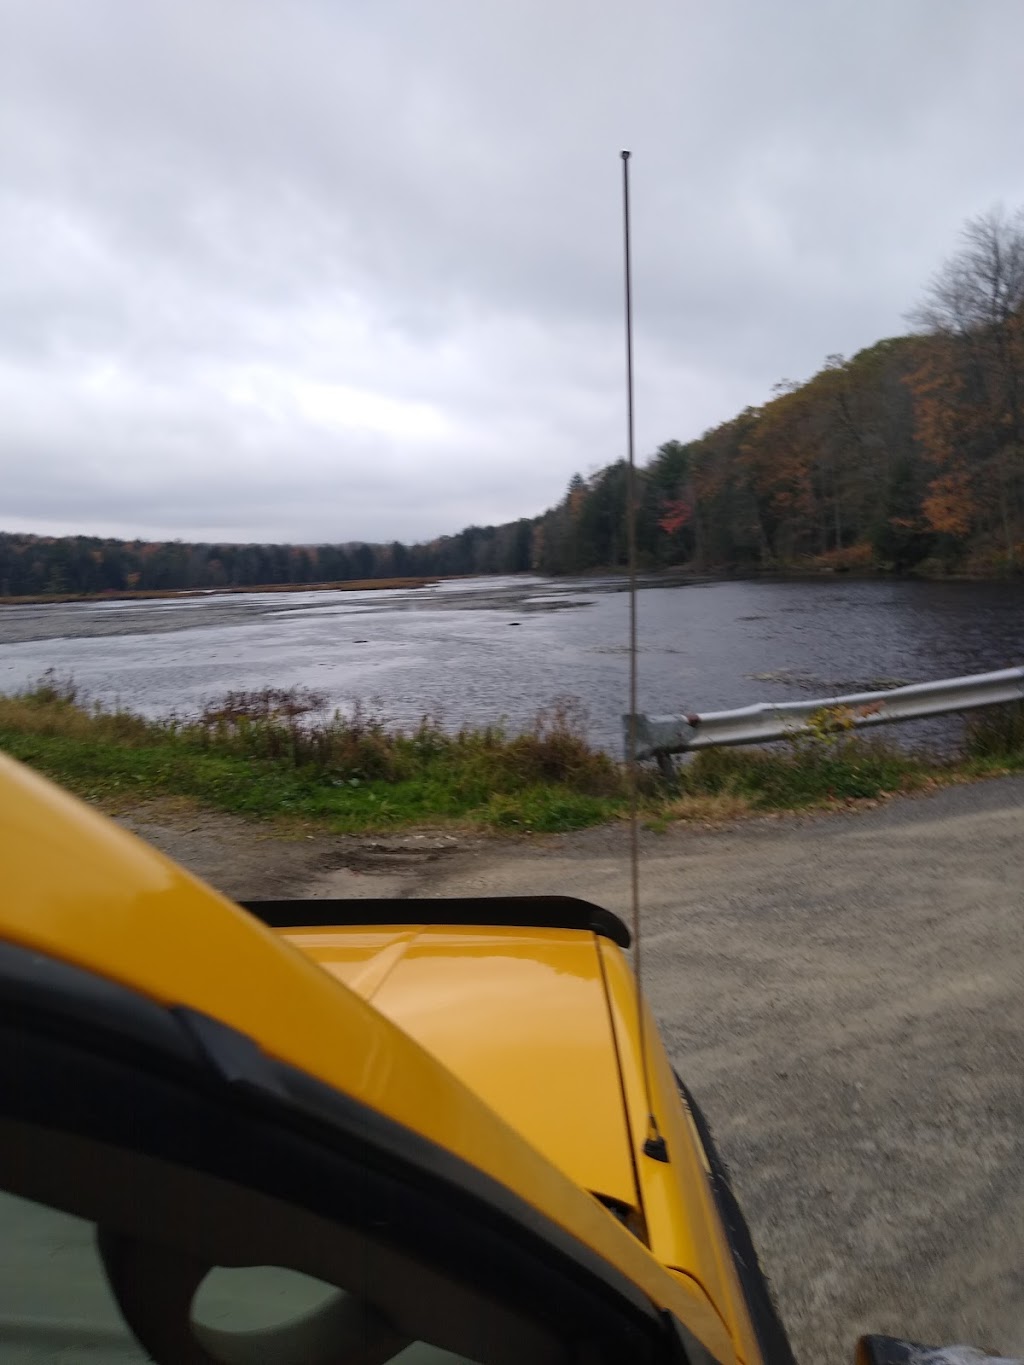 Marsh Pond State Forest | Nineveh, NY 13813 | Phone: (607) 674-4017